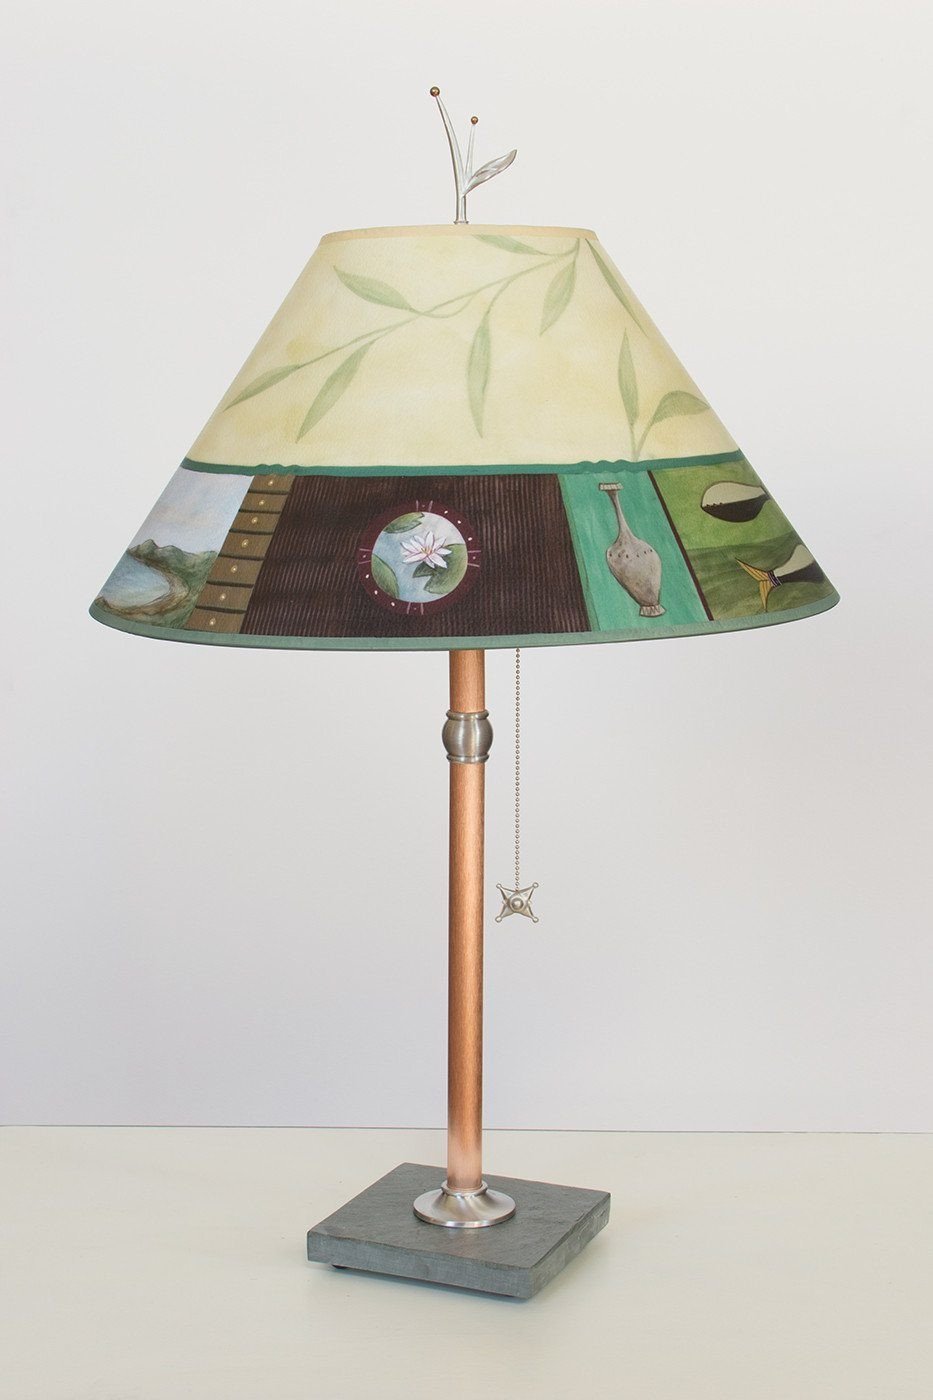 Copper Table Lamp on Vermont Slate with Large Conical Shade in Twin Fish